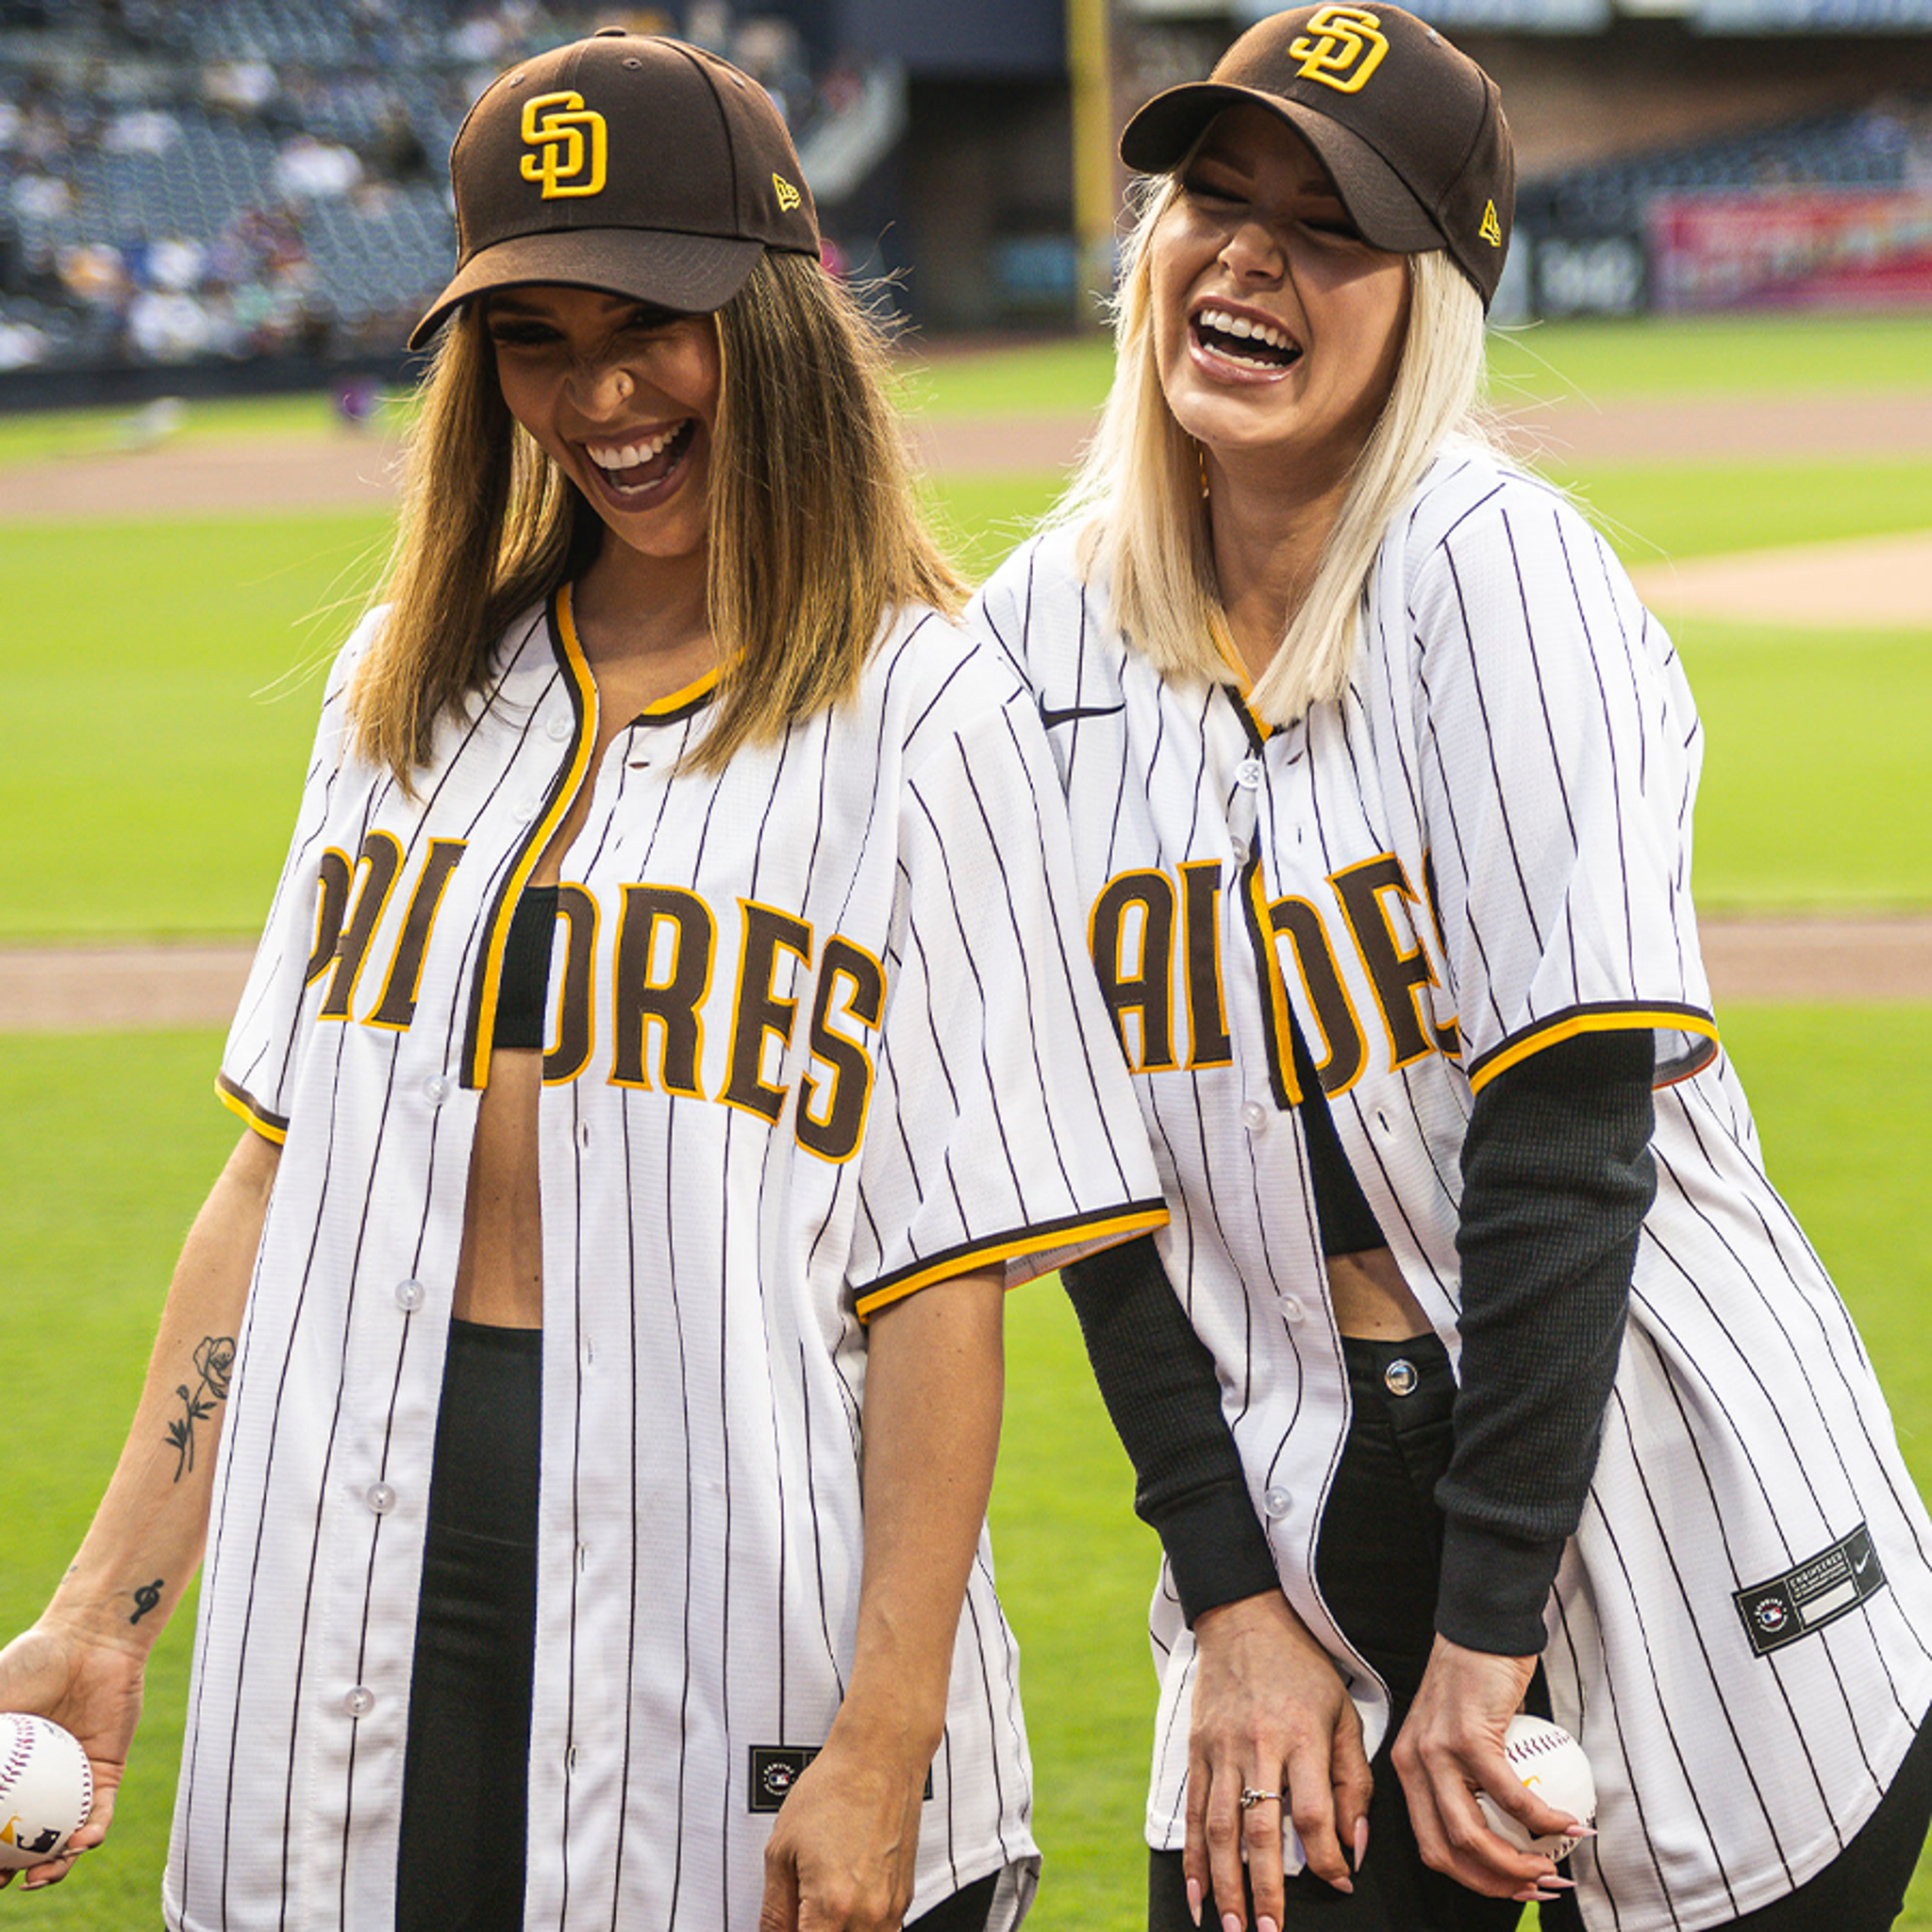 PHOTOS: Re-imagining the Padres' uniforms 